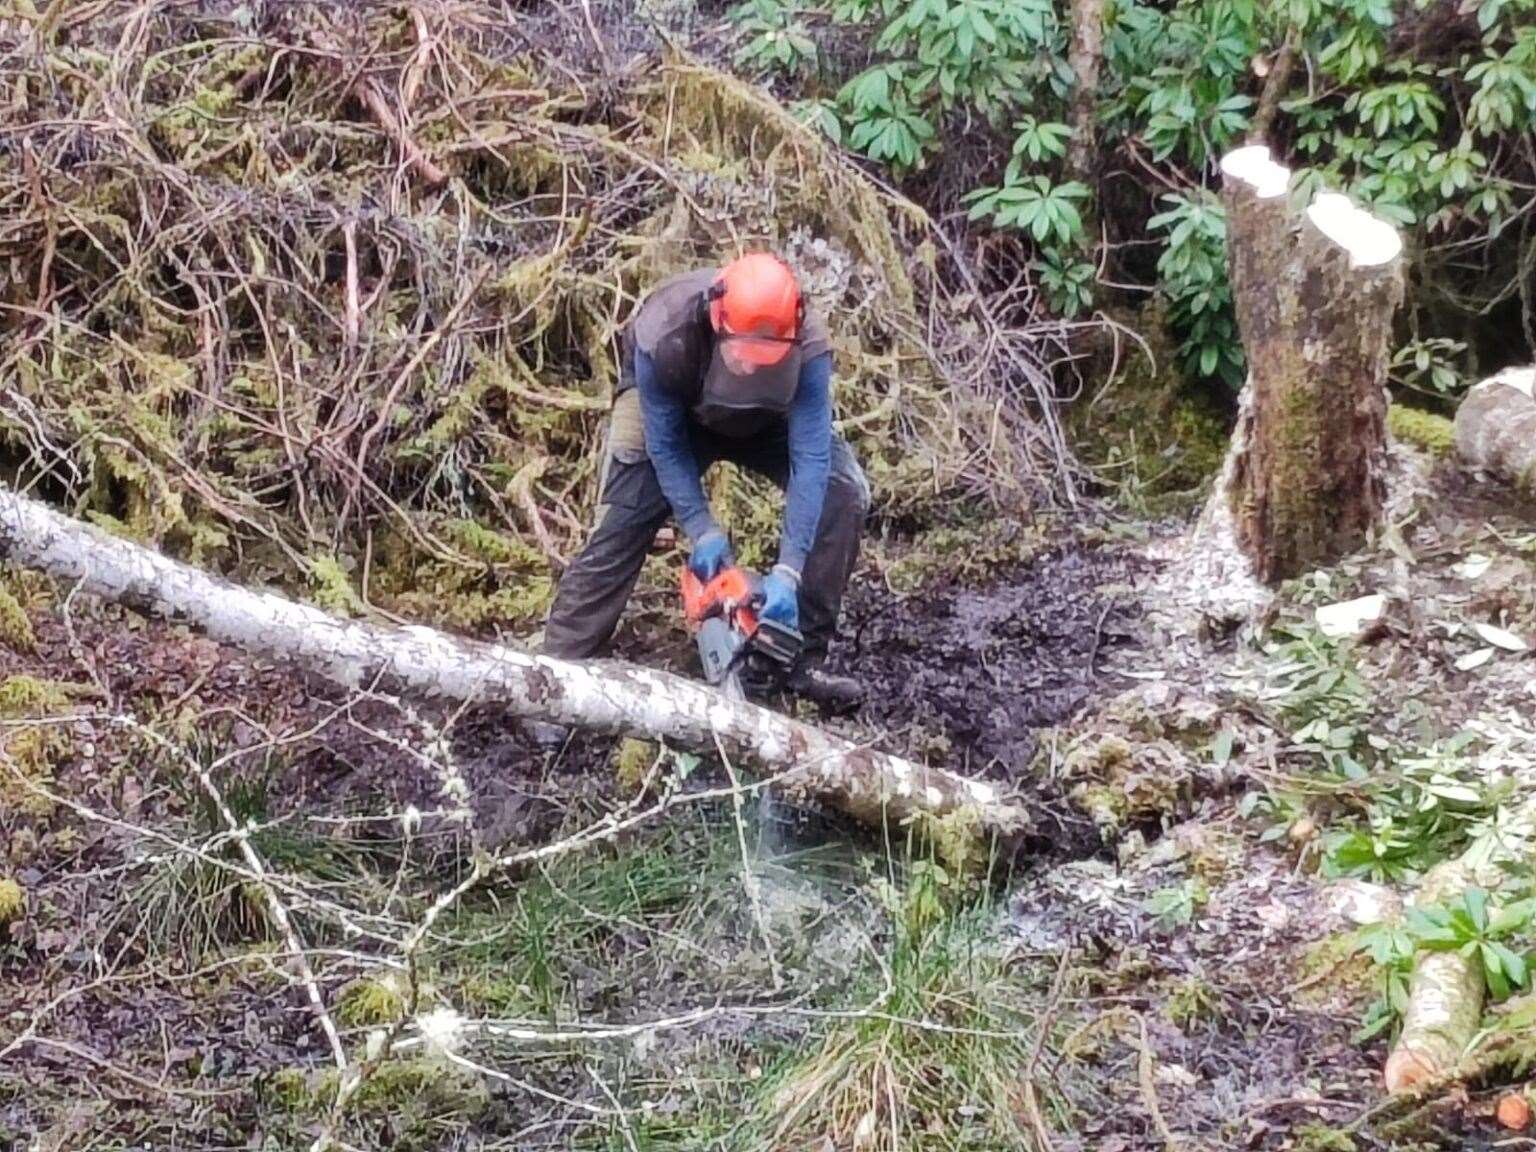 A worker from Pro Forestry Scotland clears overgrowth from the pond on the Boleskine Estate.